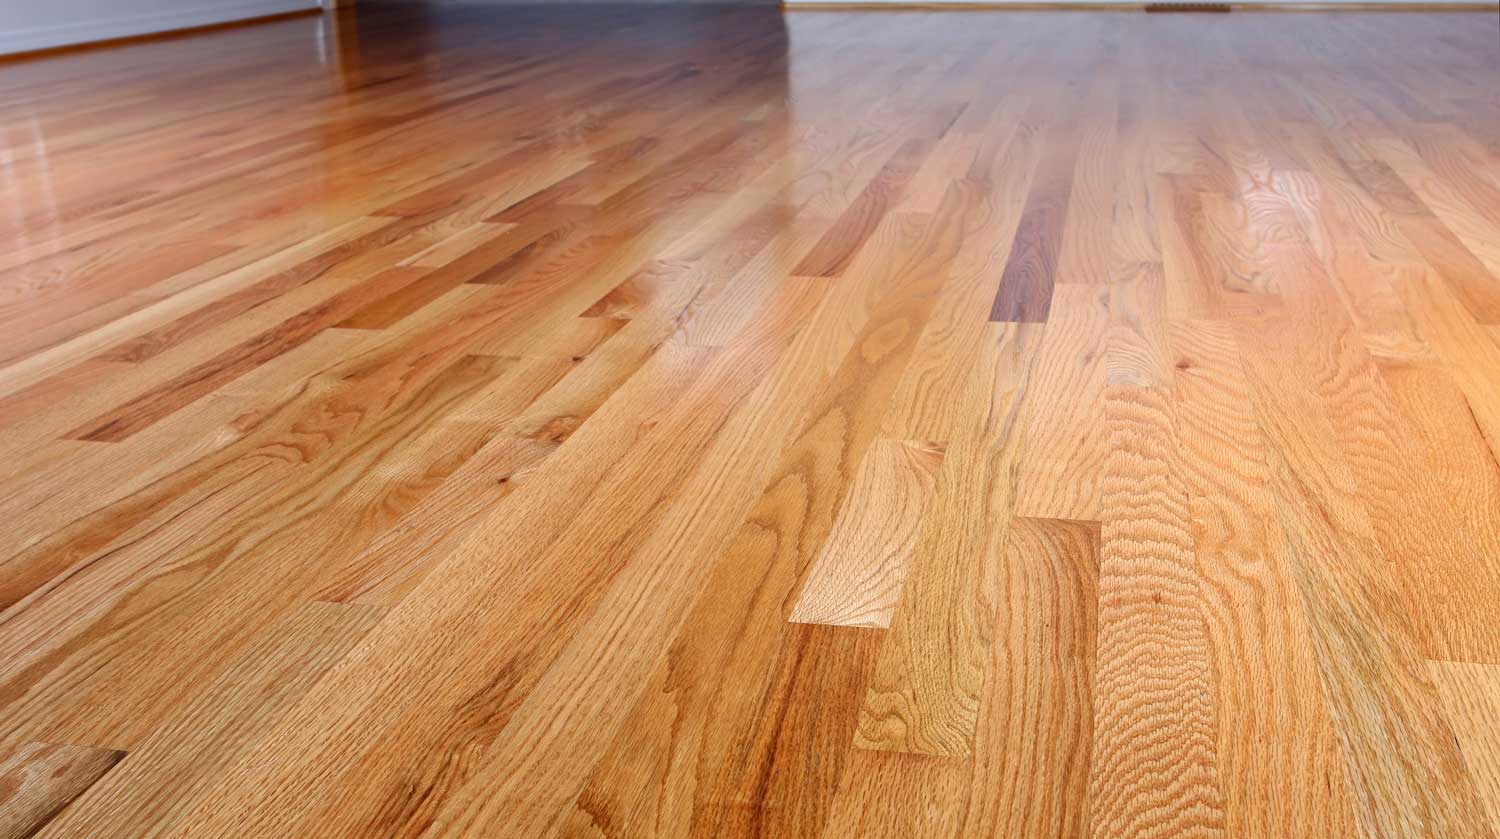 Cost To Refinish A Hardwood Floor, How Much Does It Cost To Get Hardwood Floors